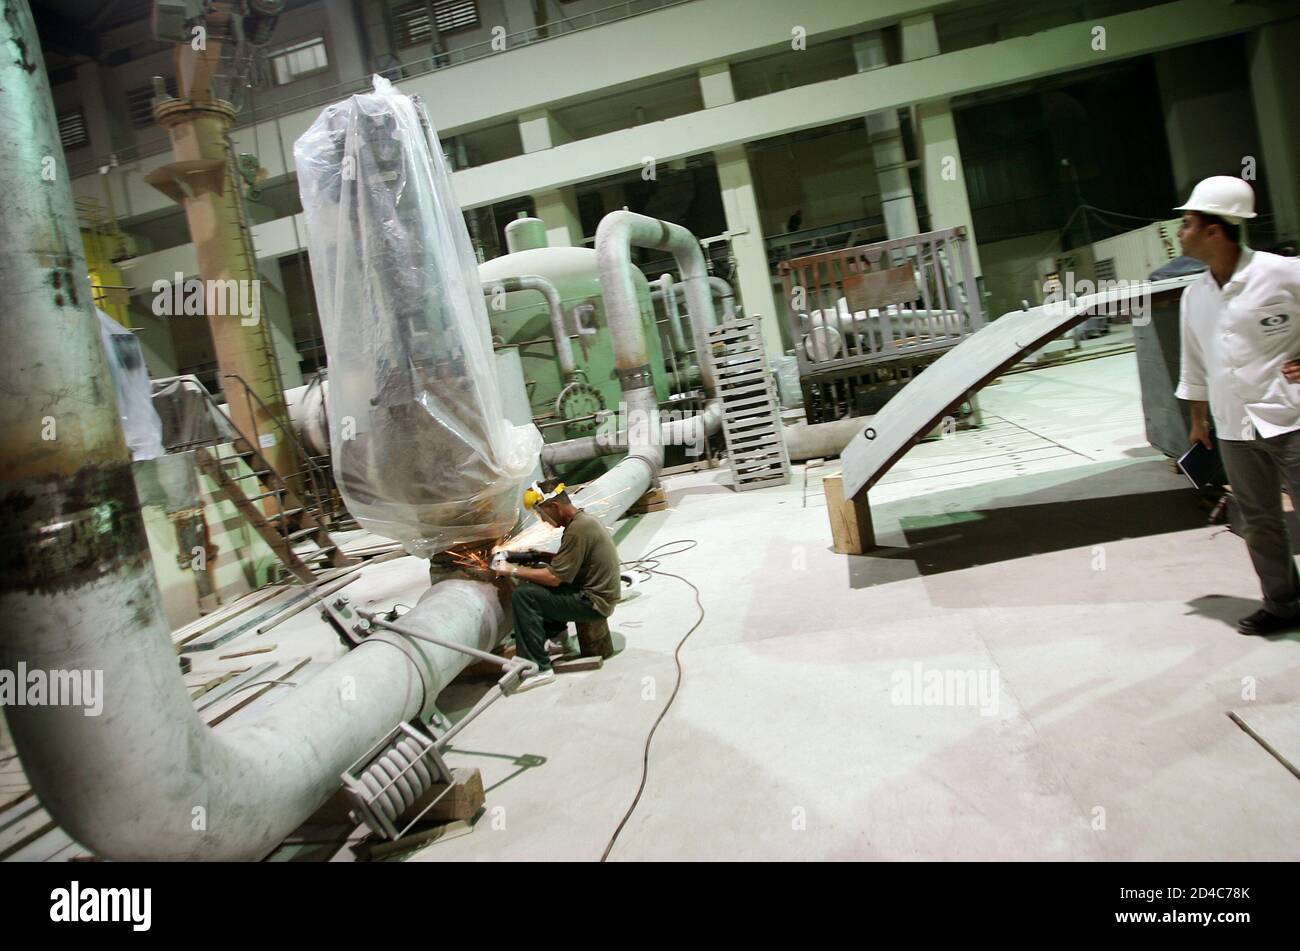 Workers work at the nuclear plant in the southwestern Iranian city of Bushehr June 22, 2005. Russian fuel for Iran's first nuclear power reactor, part of a programme Washington fears may be used to make bombs, will be delivered within months, a senior Iranian atomic official said on Wednesday. Russian welders and other workers working on the electricity turbine area and reactor building, which will be sealed off and operated automatically once fuel is introduced. REUTERS/Damir Sagolj  DS Stock Photo